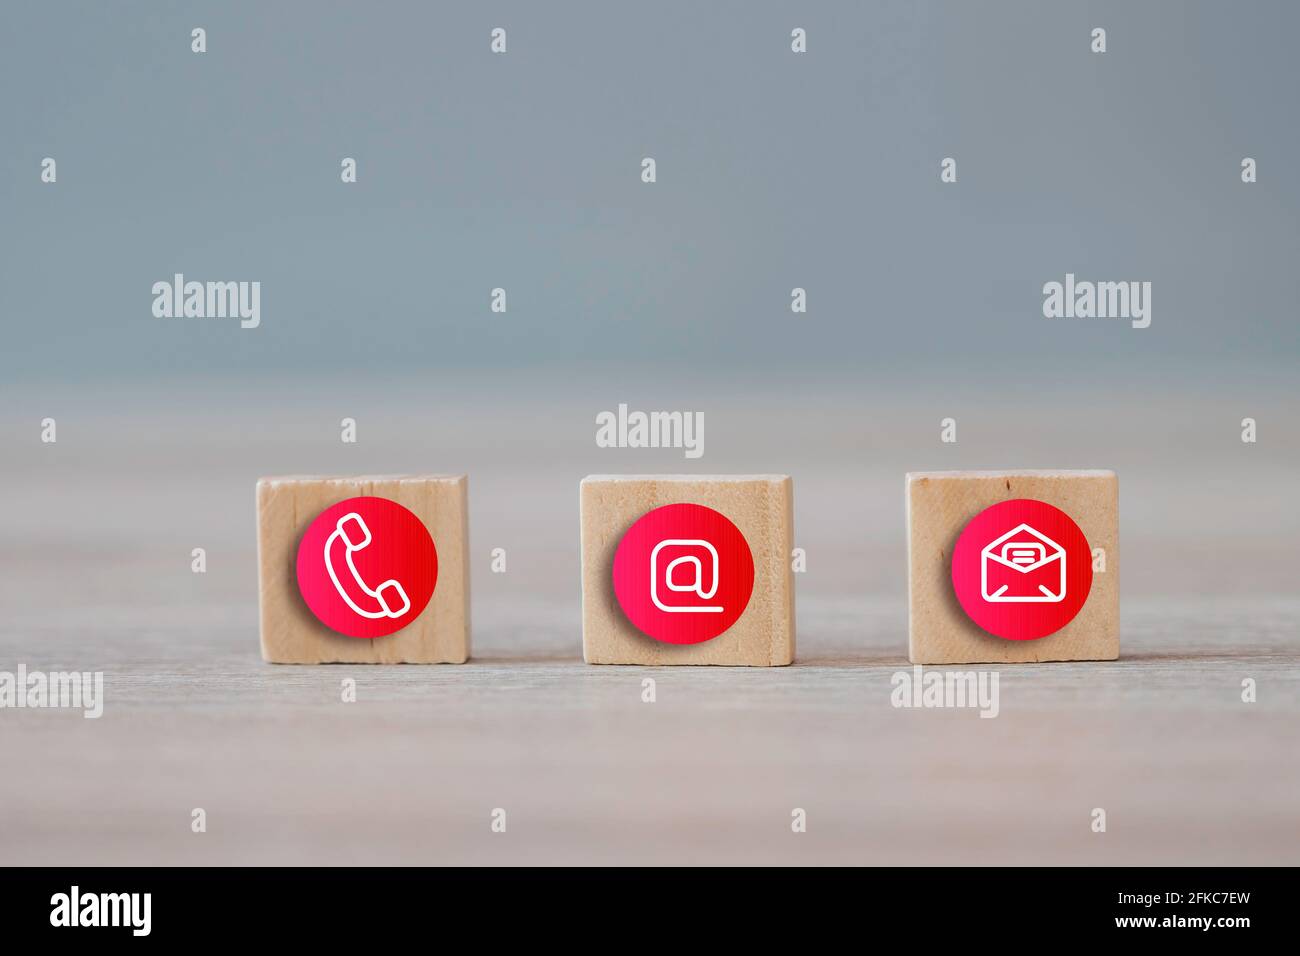 Hotline support contact communication concept. Contact us communication icons on wood cubes. Stock Photo